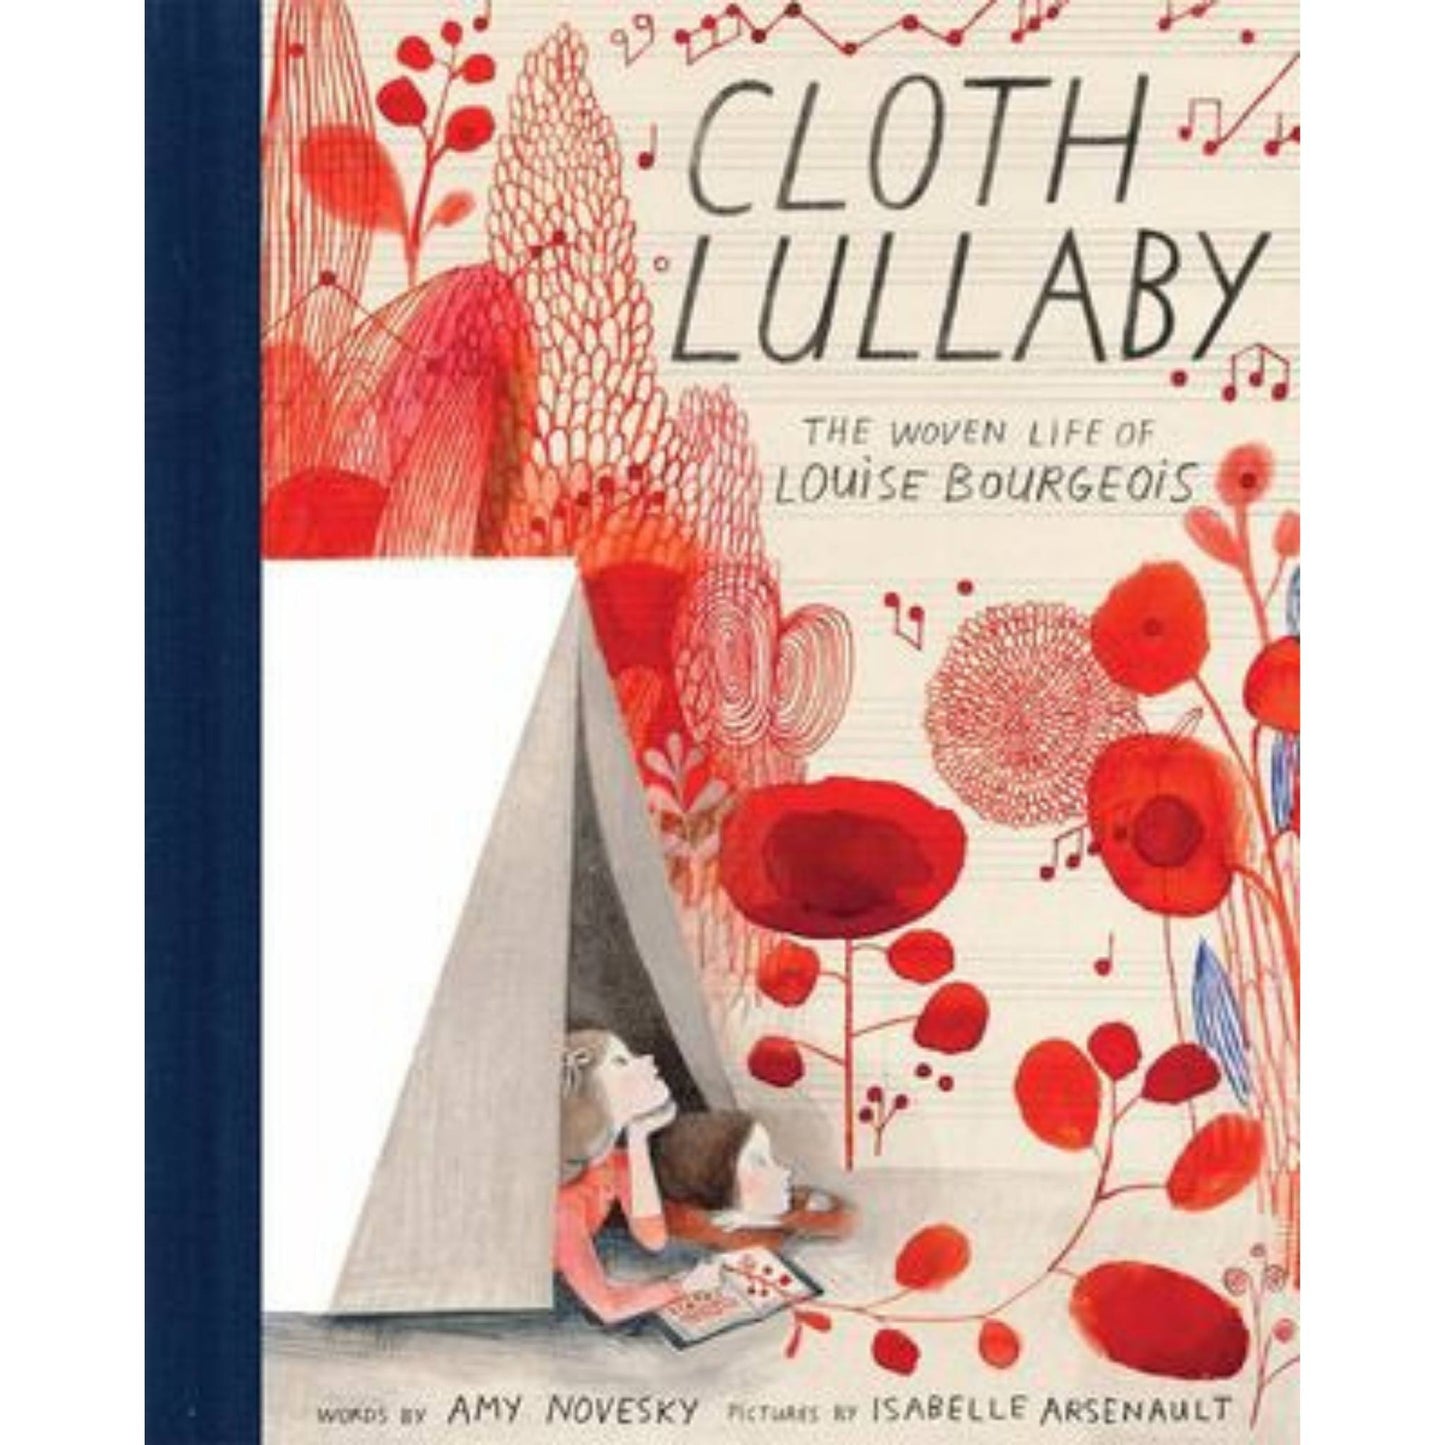 Cloth Lullaby - The Woven Life of Louise Bourgeois